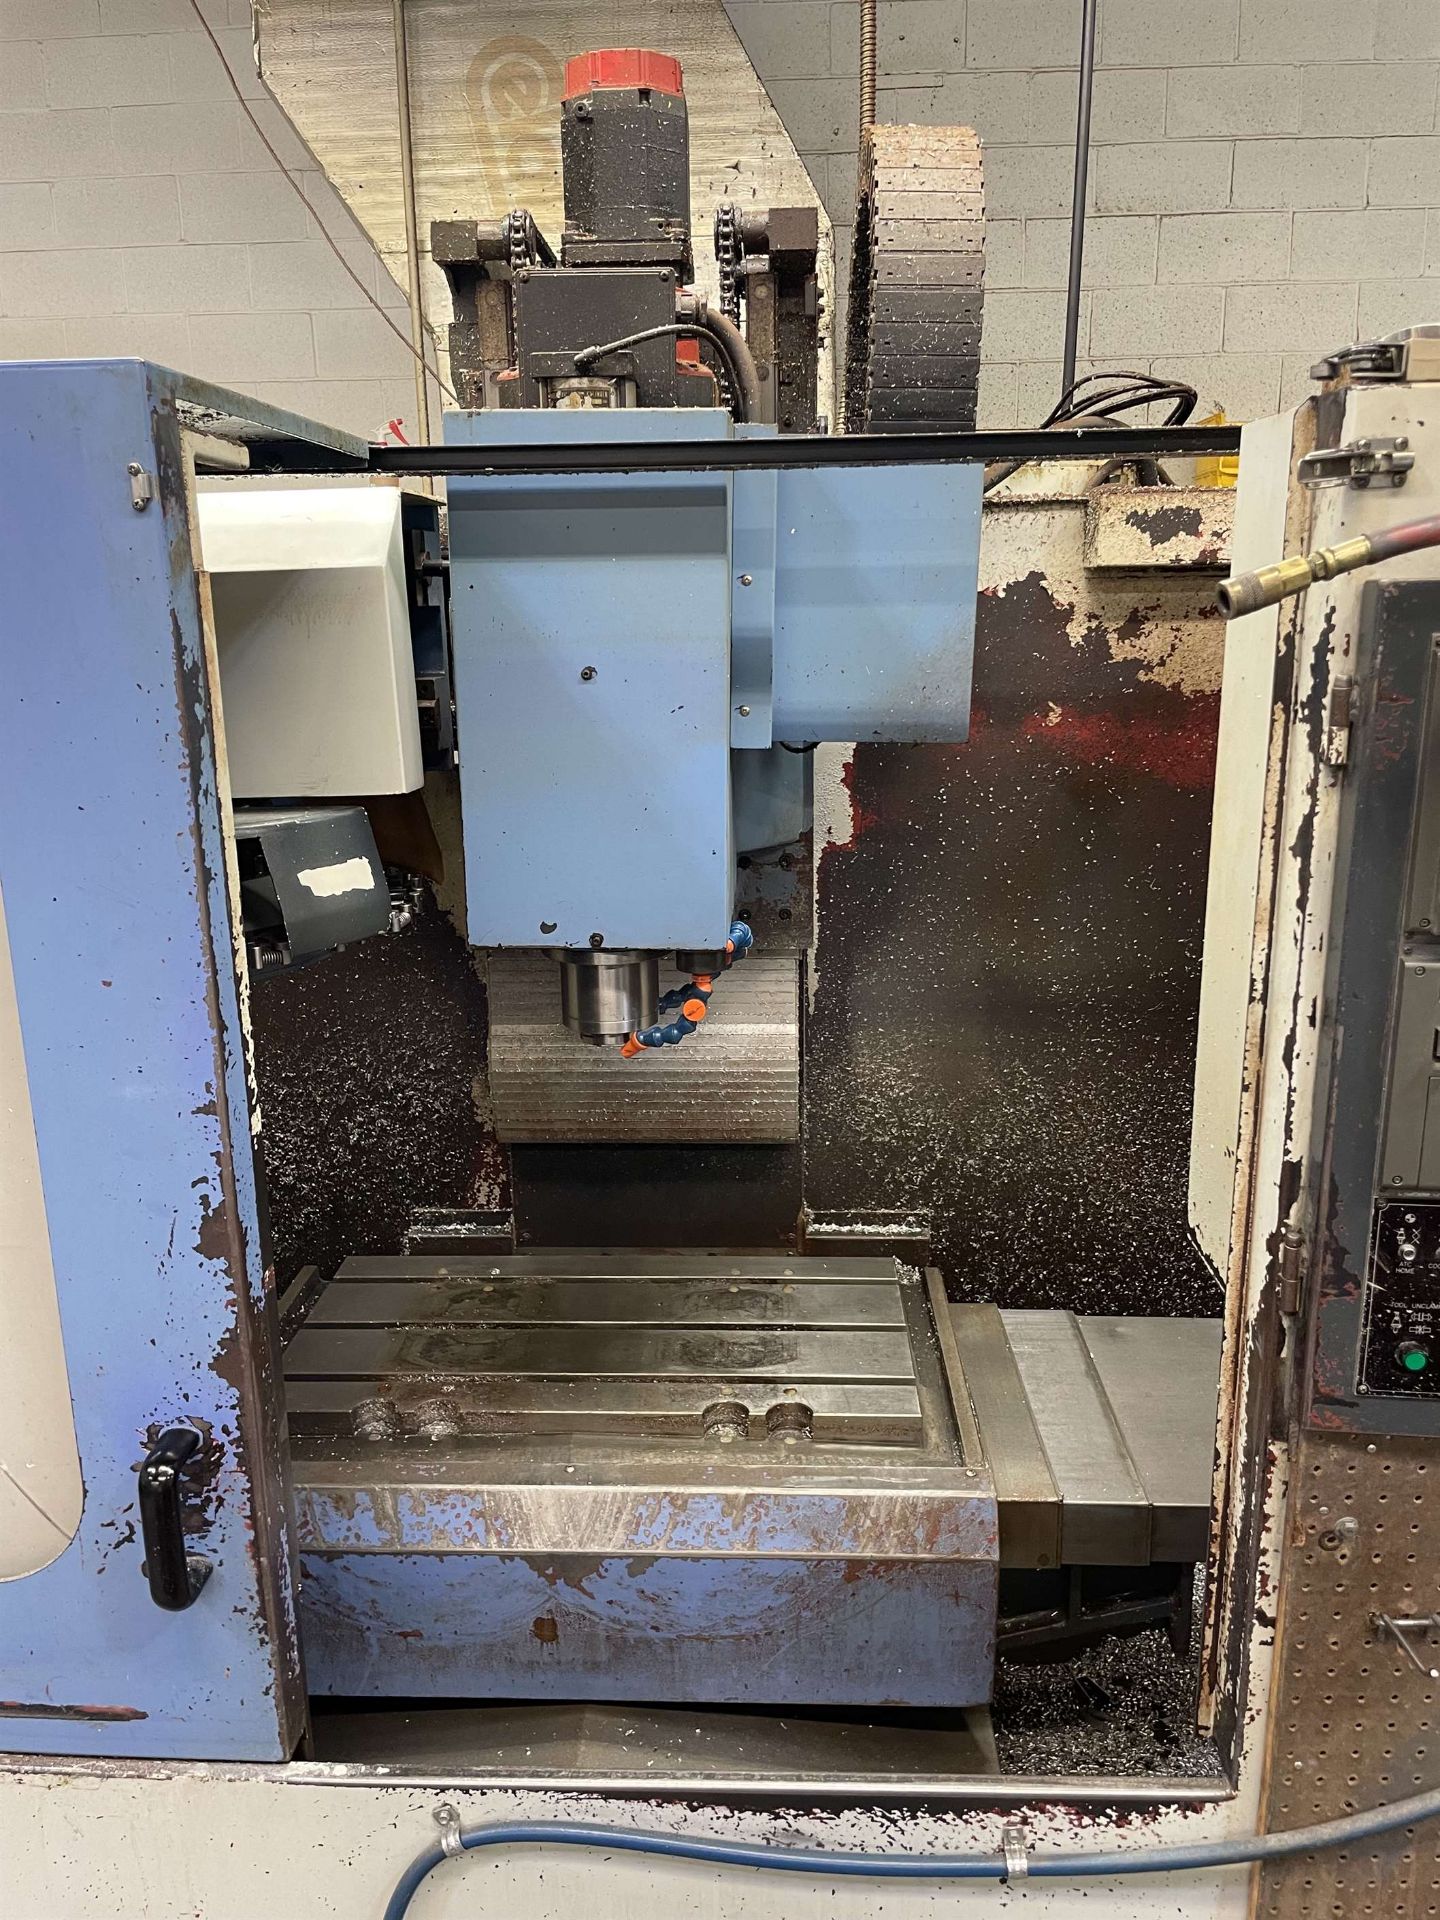 LEADWELL V-25 Vertical Machining Center, s/n L1SIG0331, w/ FANUC 21-M Control, 15” x 30” Table, BT30 - Image 5 of 8